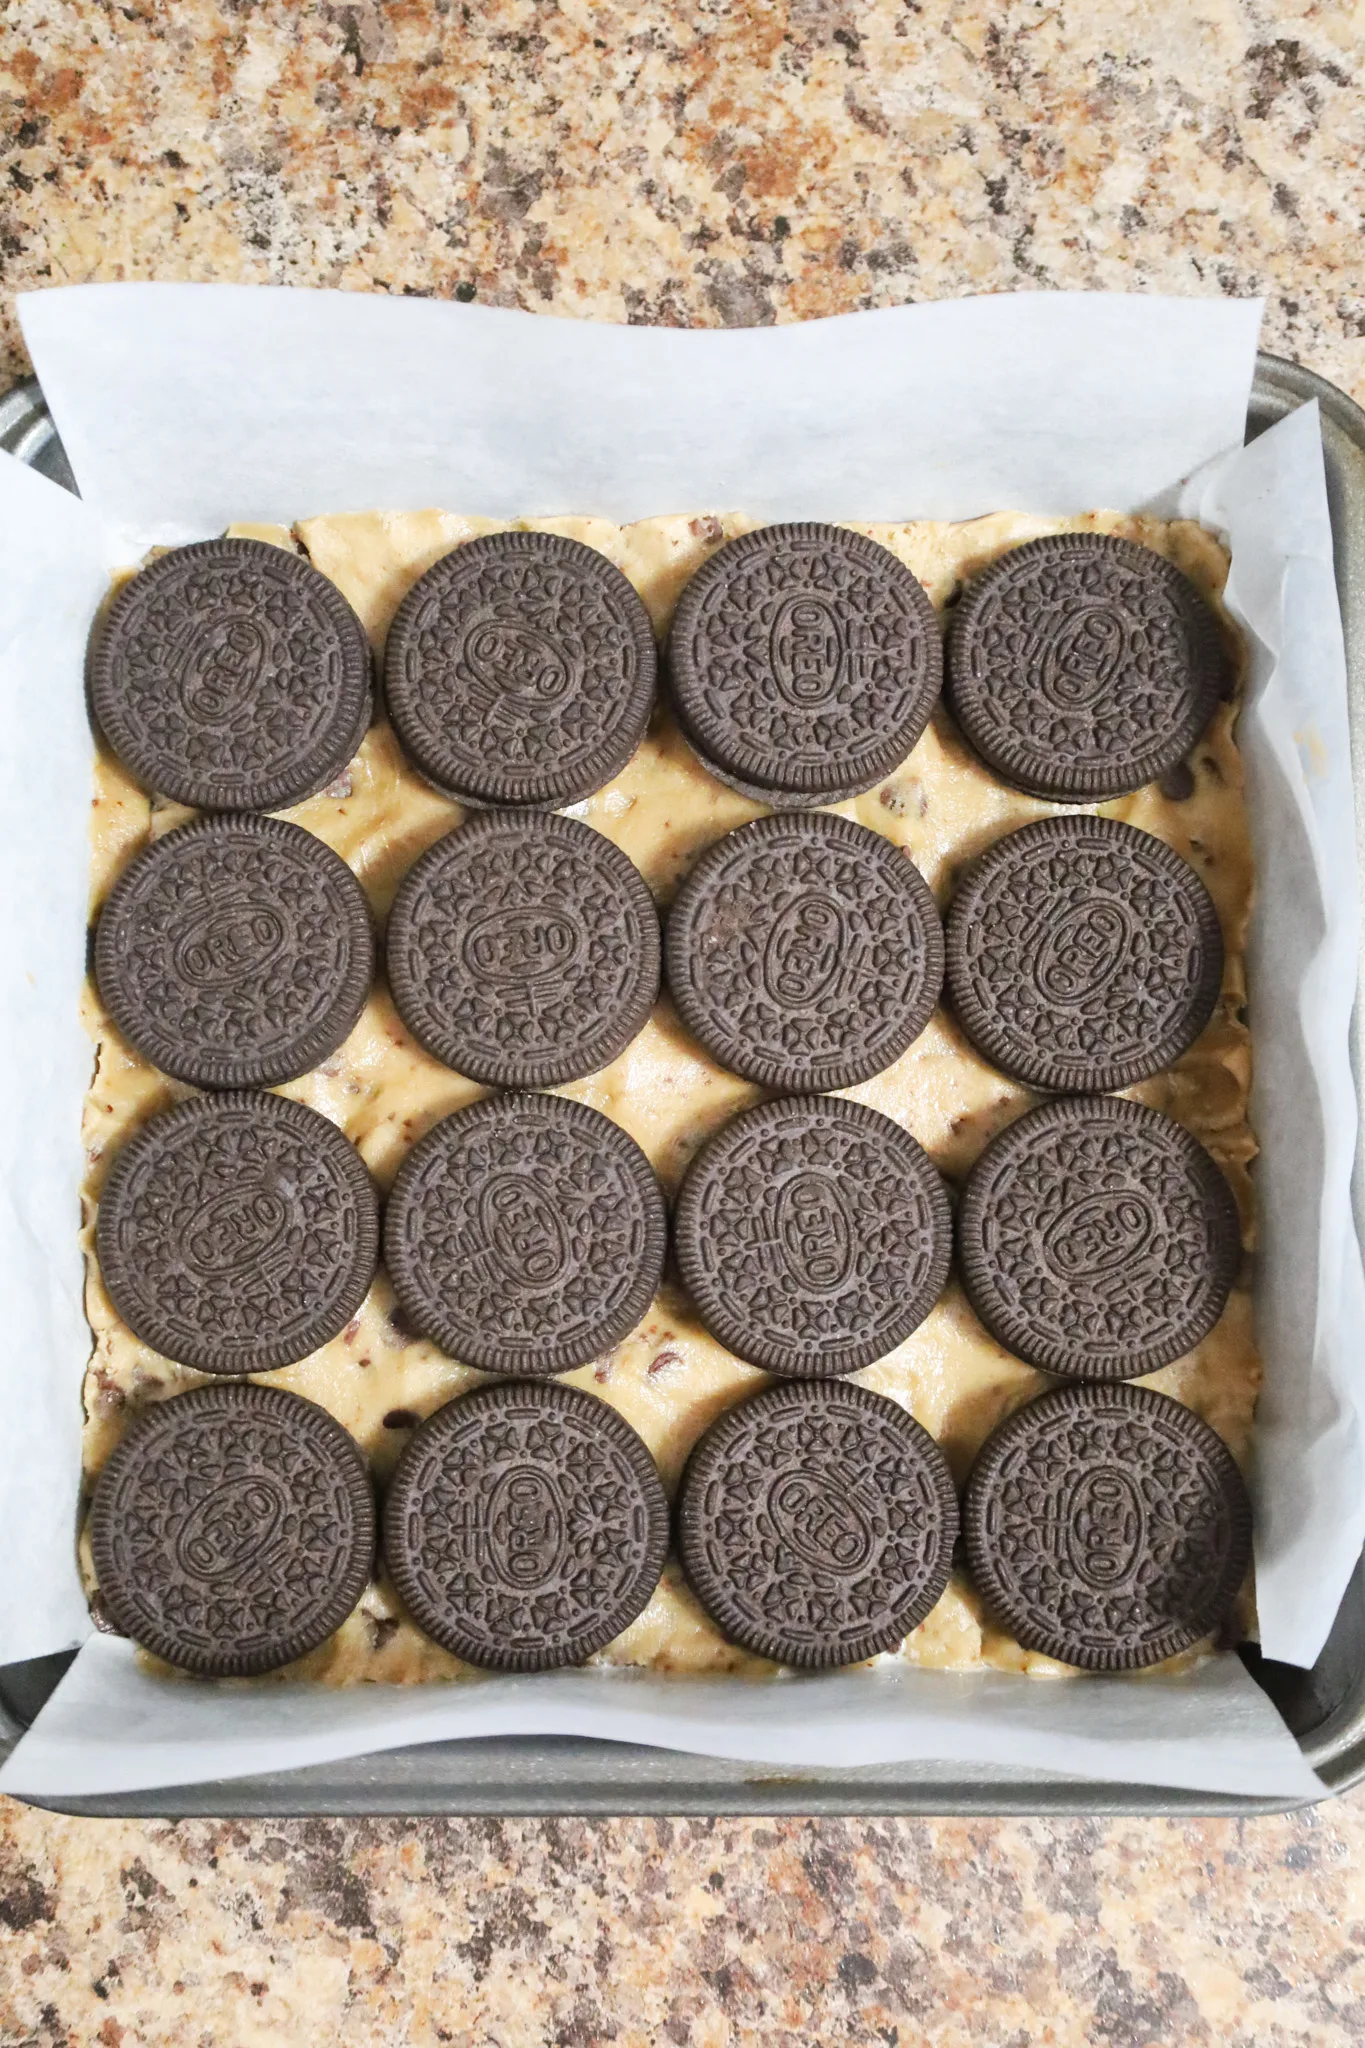 Oreo cookies on top of cookie dough in a parchment lined baking sheet